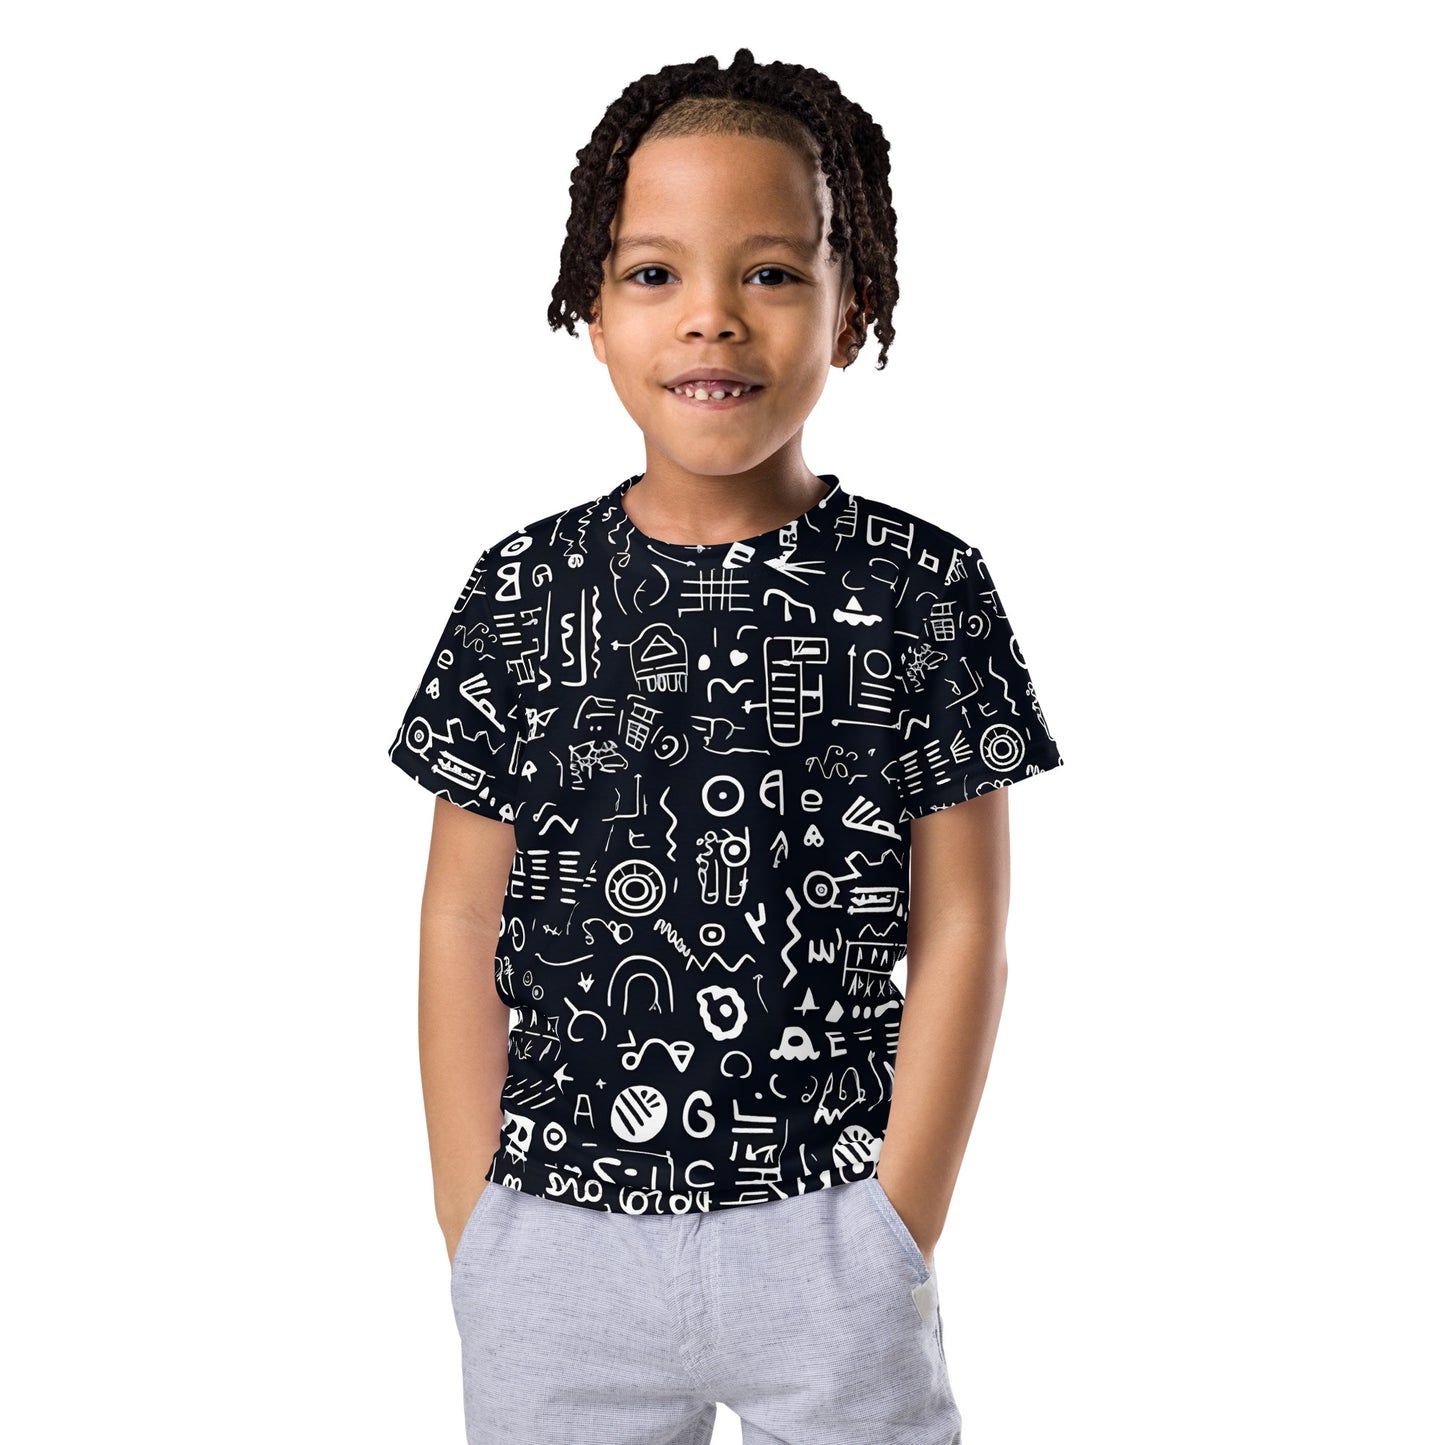 T-Shirt "Signs" for Kids